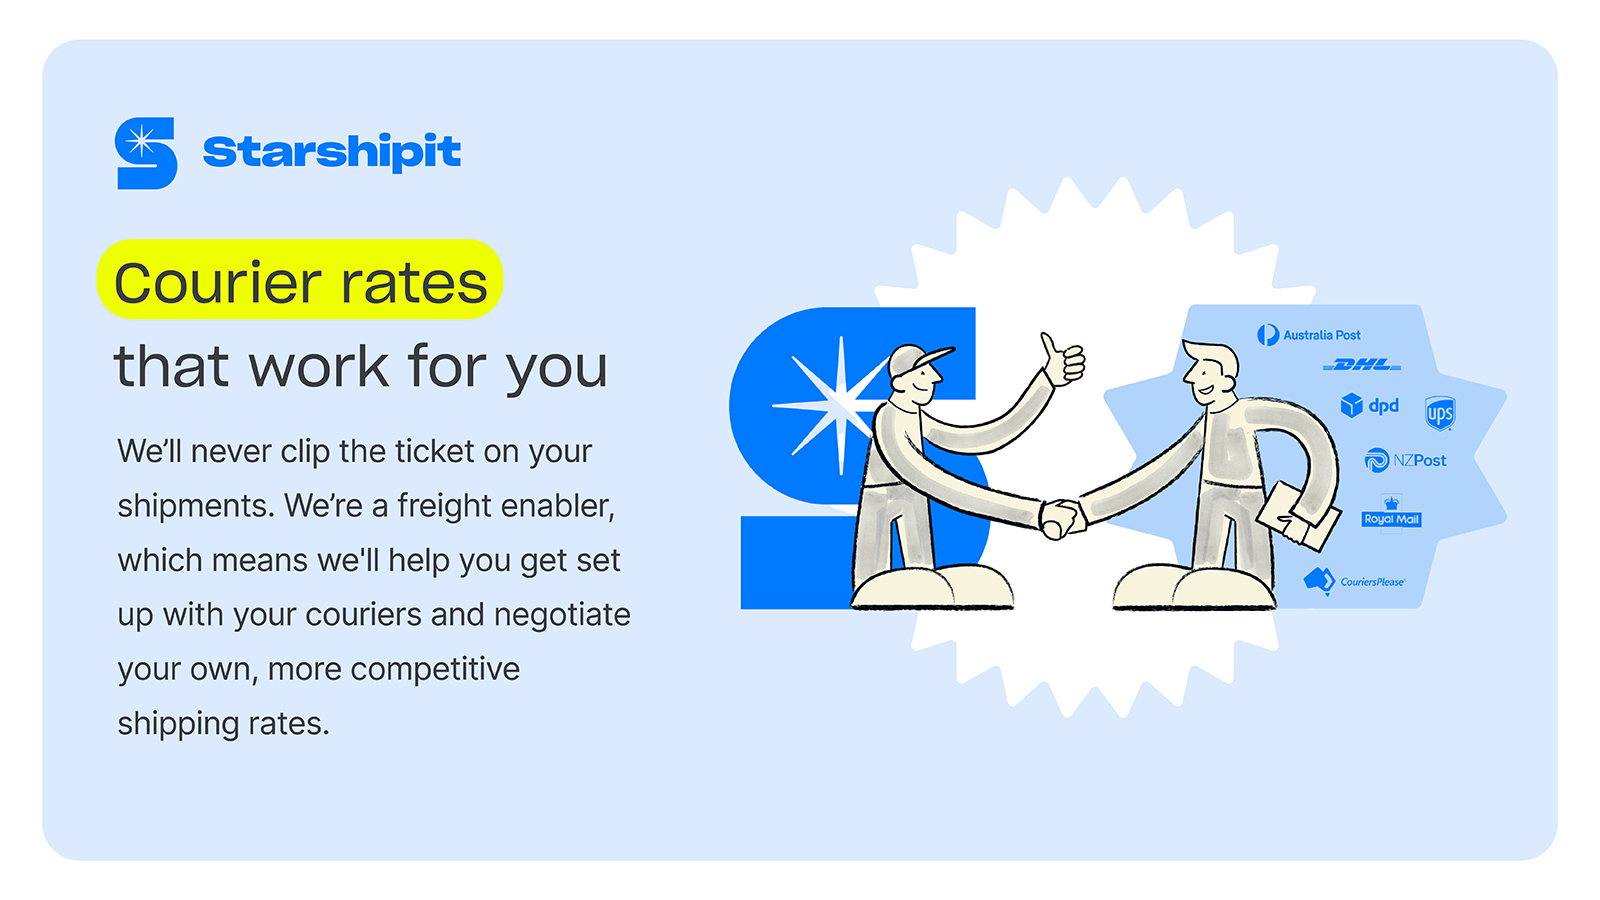 Negotiate rates that work for you. Build a relationship with your couriers over time - Starshipit never clips the ticket!